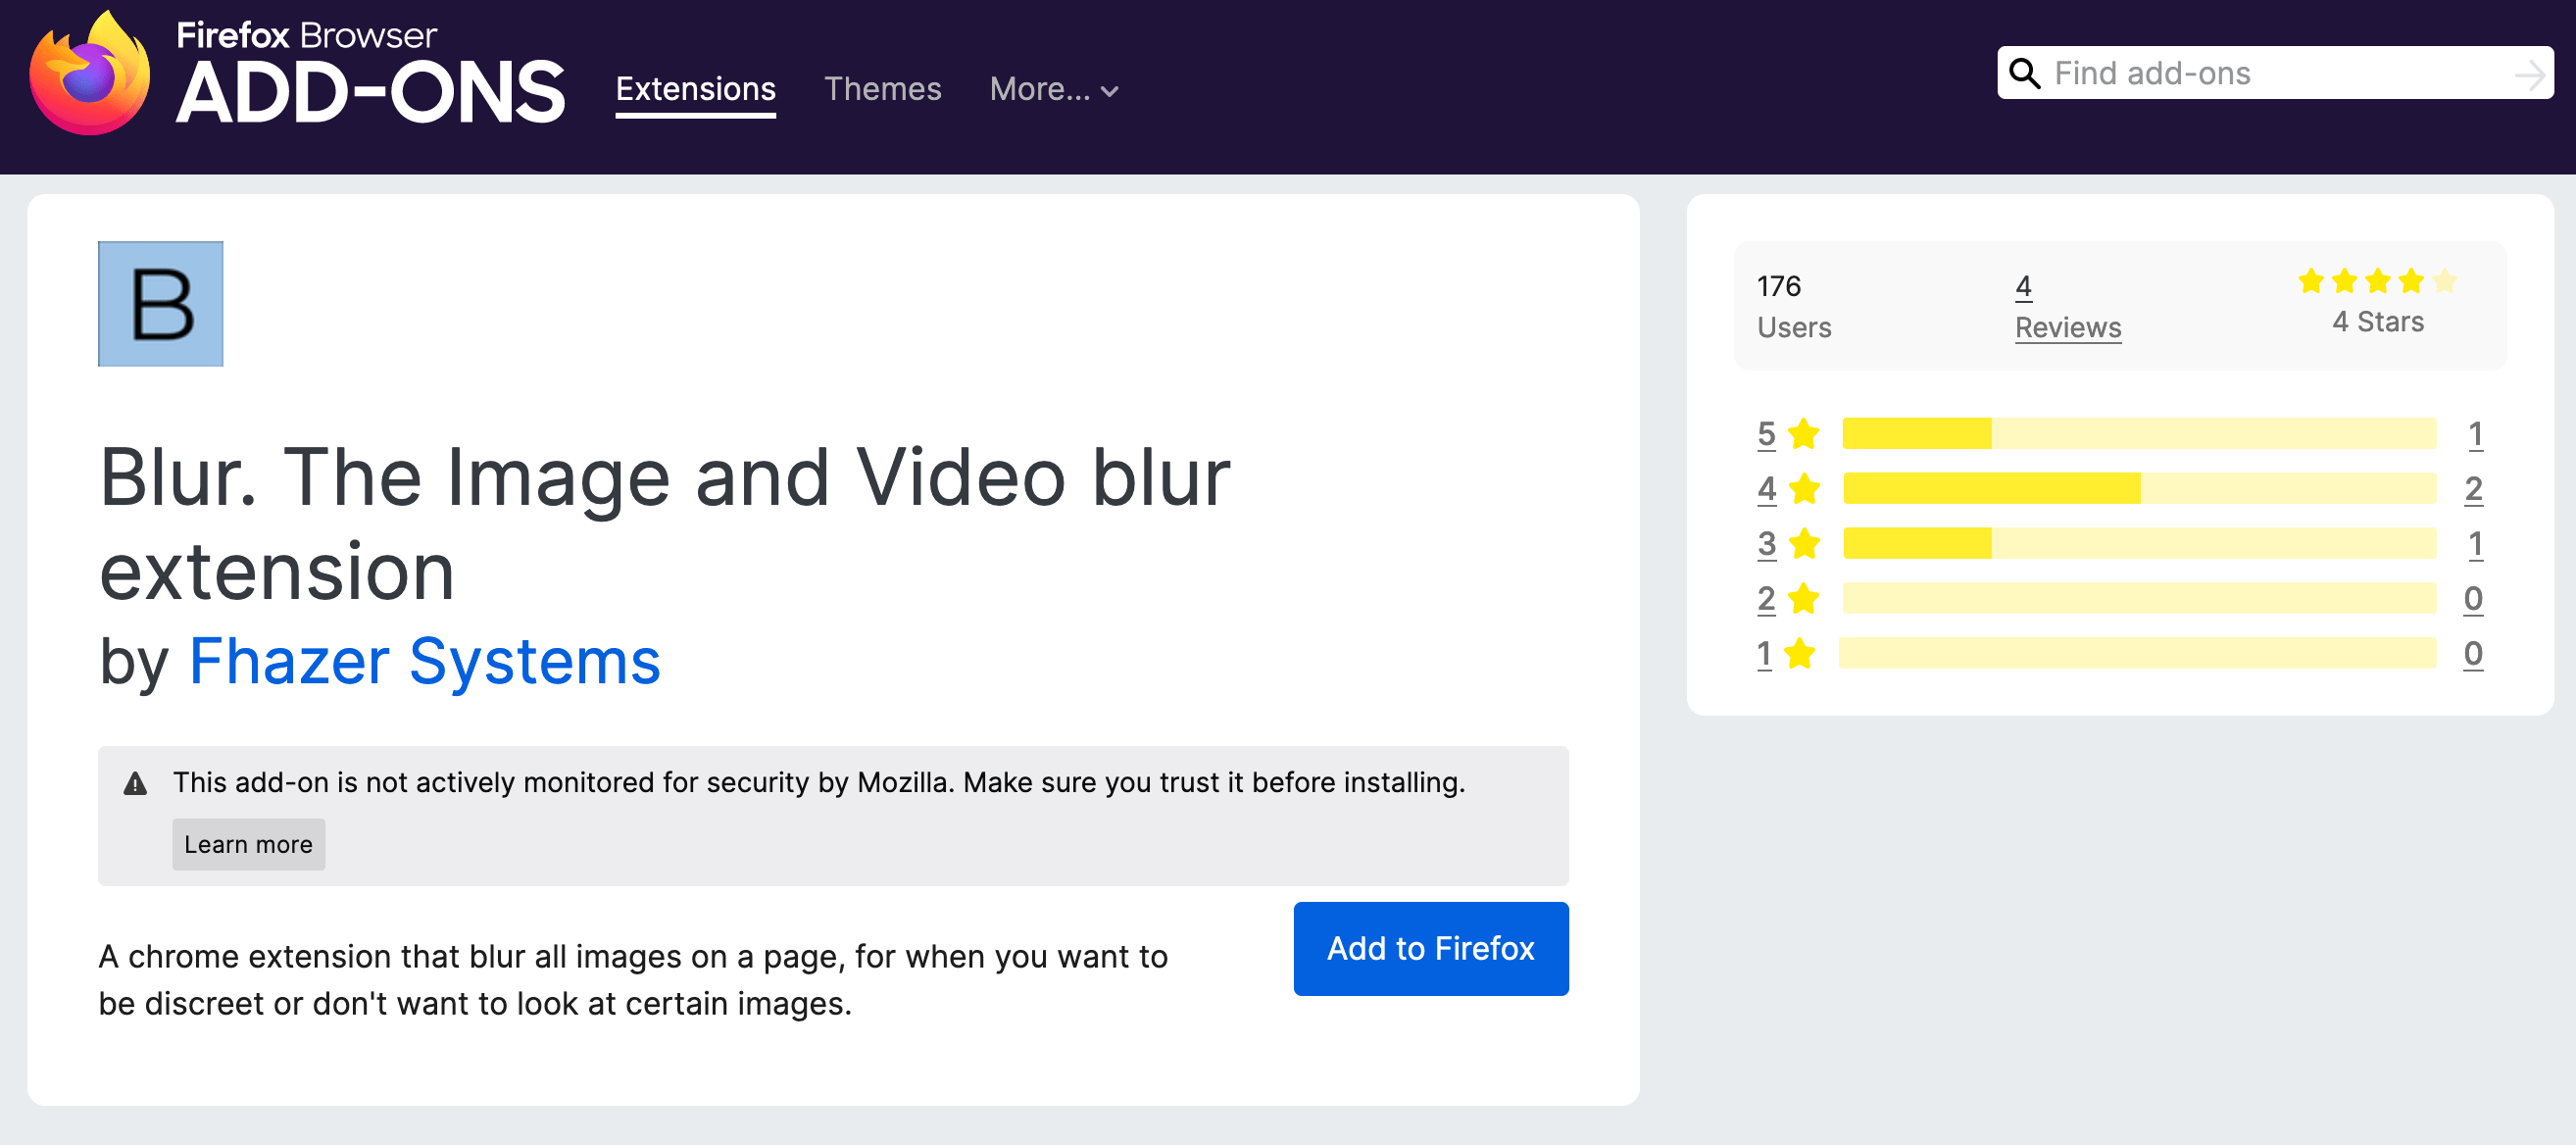 Blur. The Image and Video blur Firefox extension